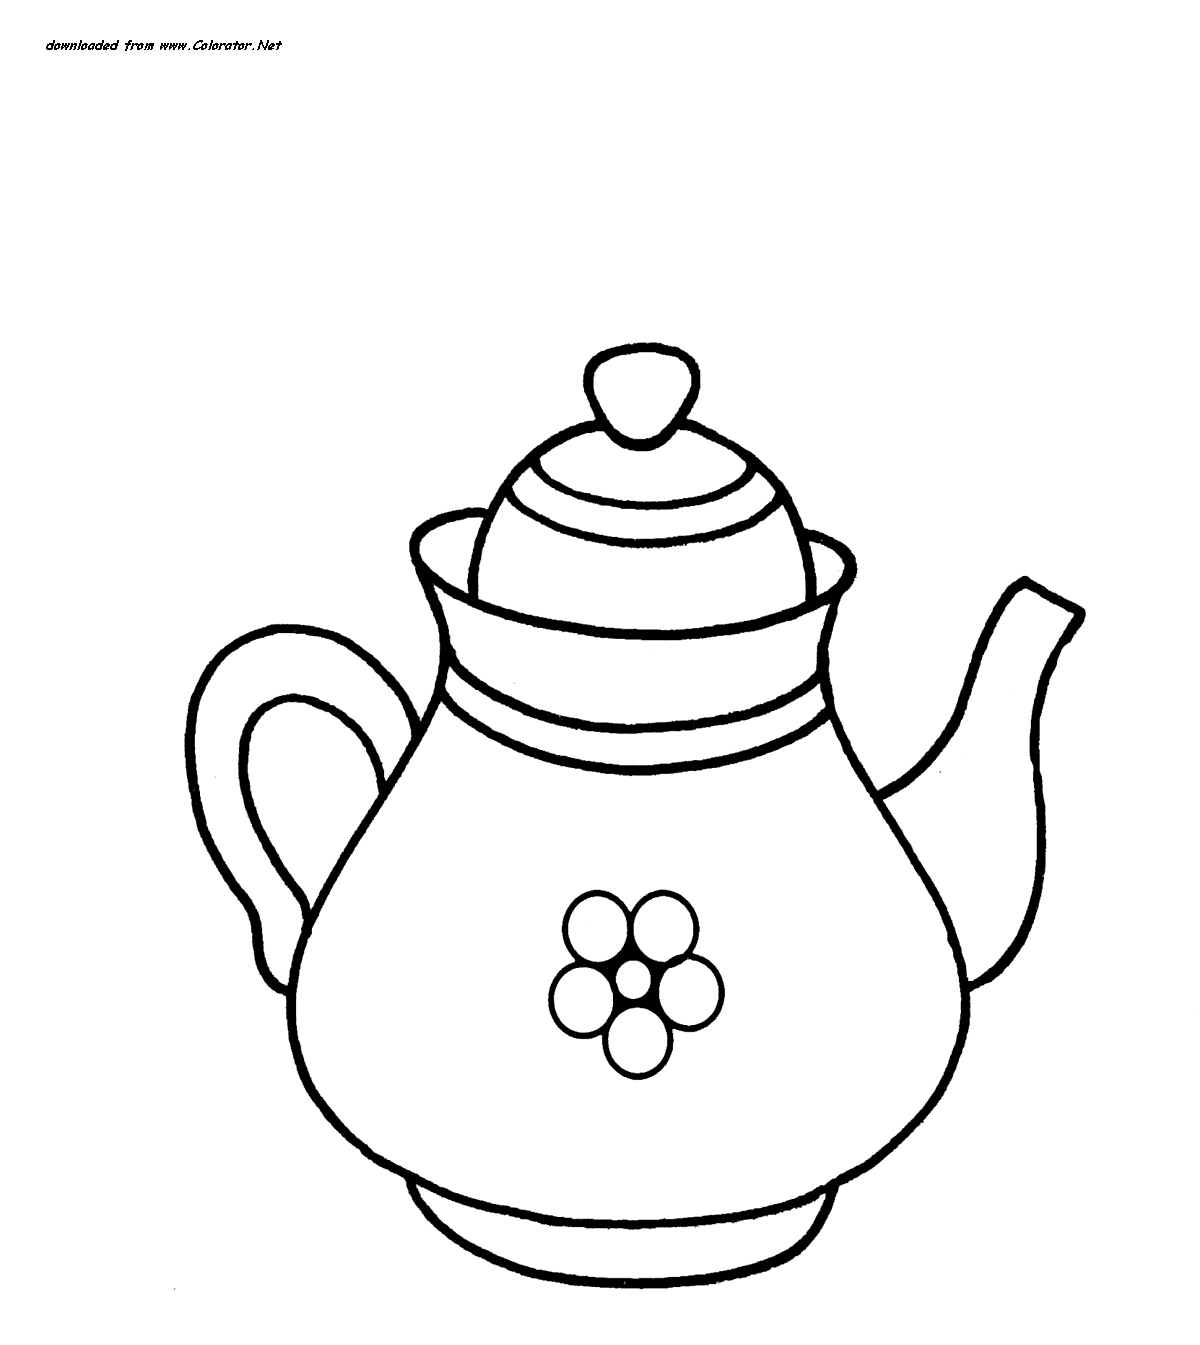 teapot colouring teapot coloring page coloring home colouring teapot 1 1